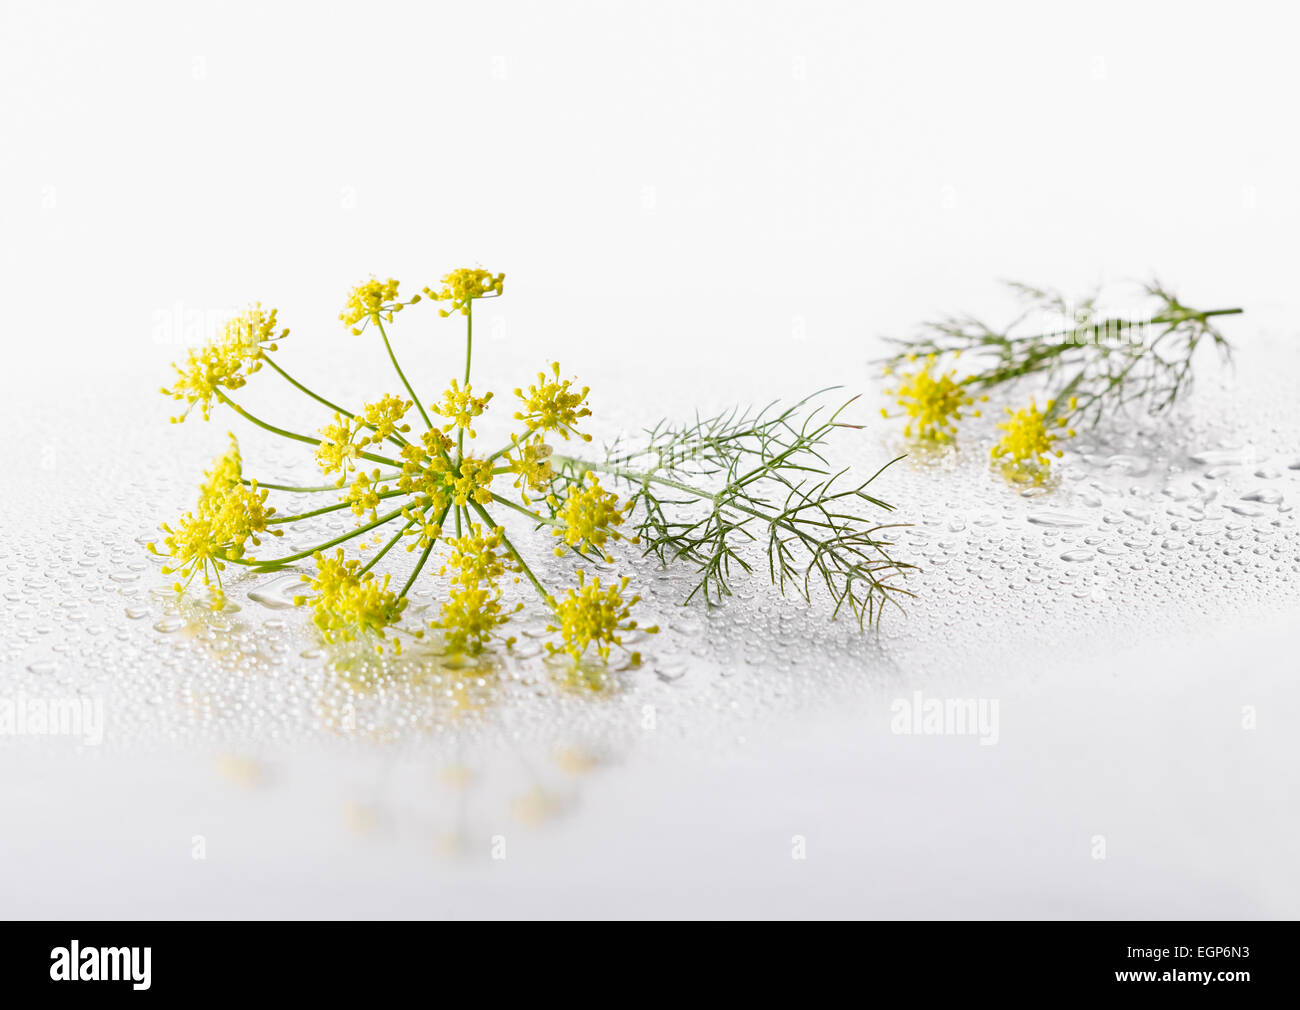 Fennel, Foeniculum vulgare flowering umbel with leaf arranged on silver background, and spritzed with water. Selective focus. Stock Photo